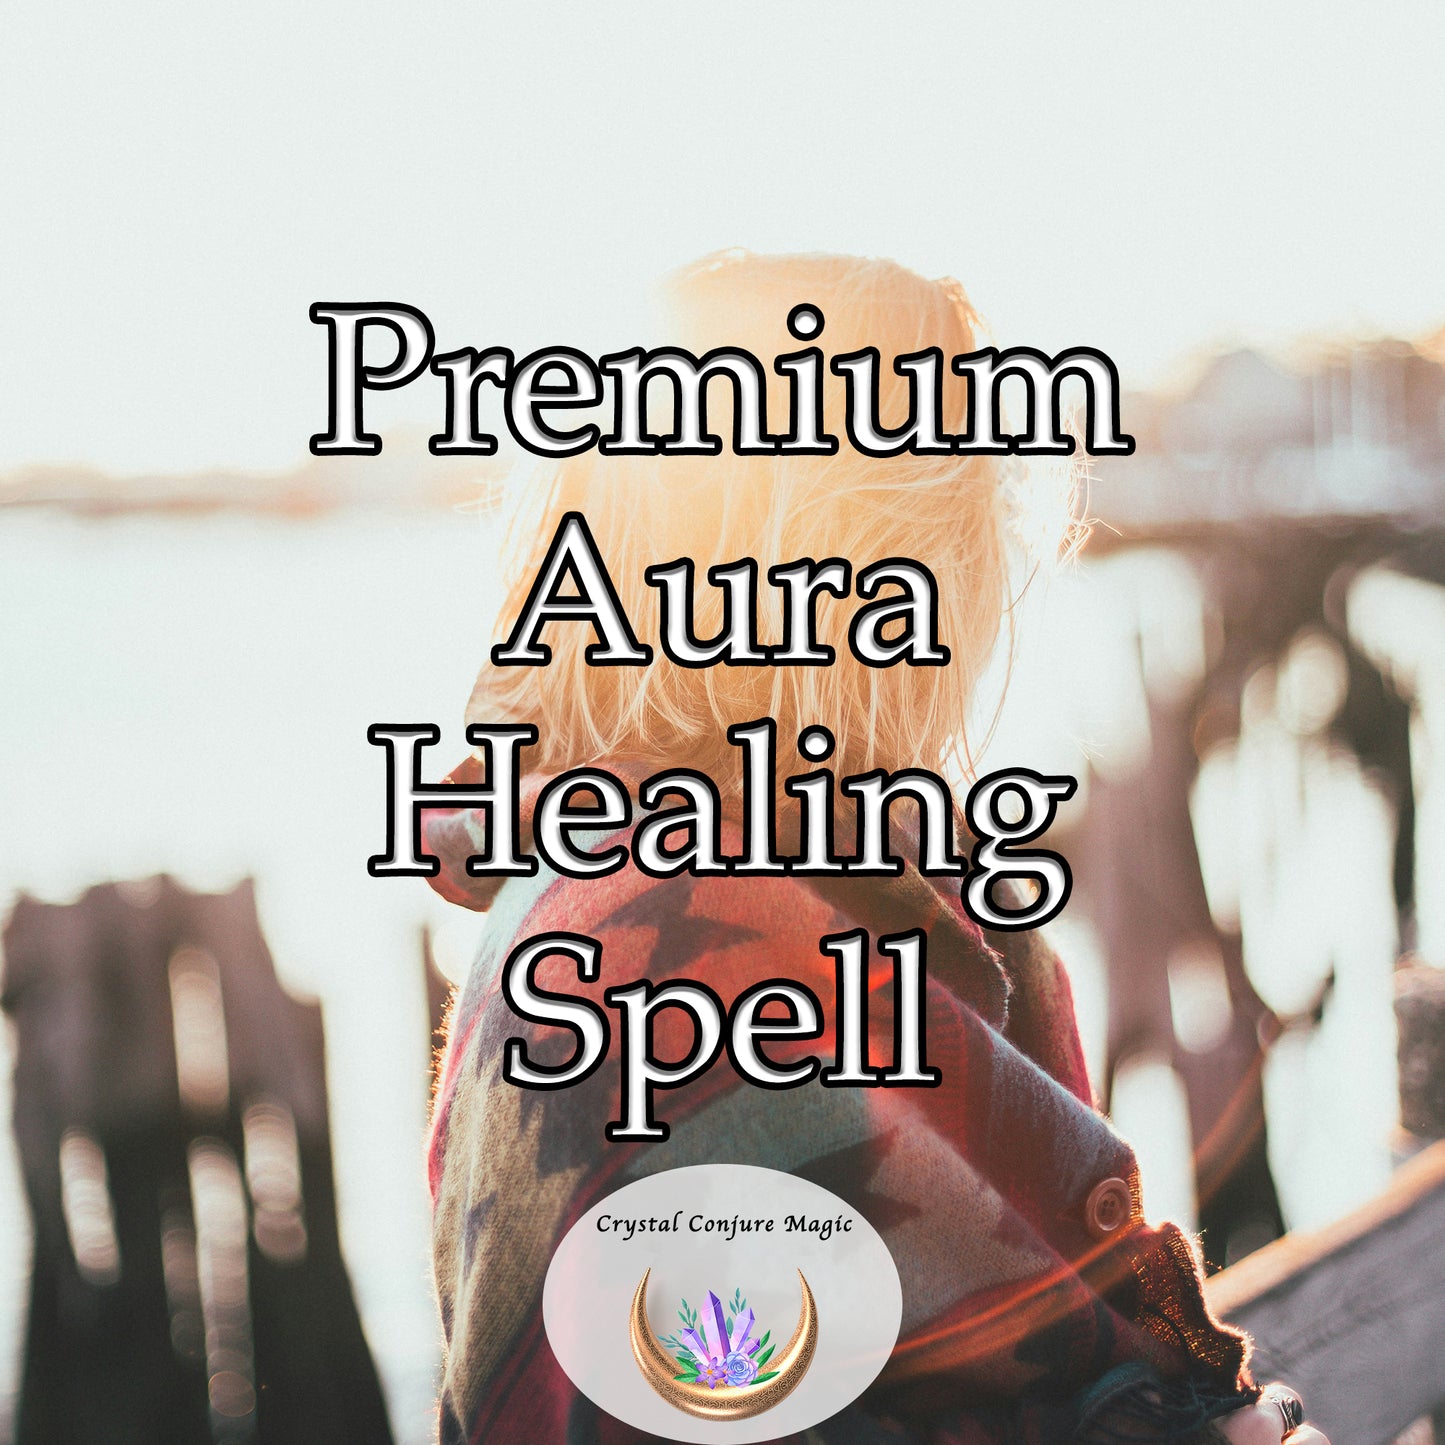 Premium Aura Healing Spell - cleanse your energetic field, recover vibrancy, and align with your truest self